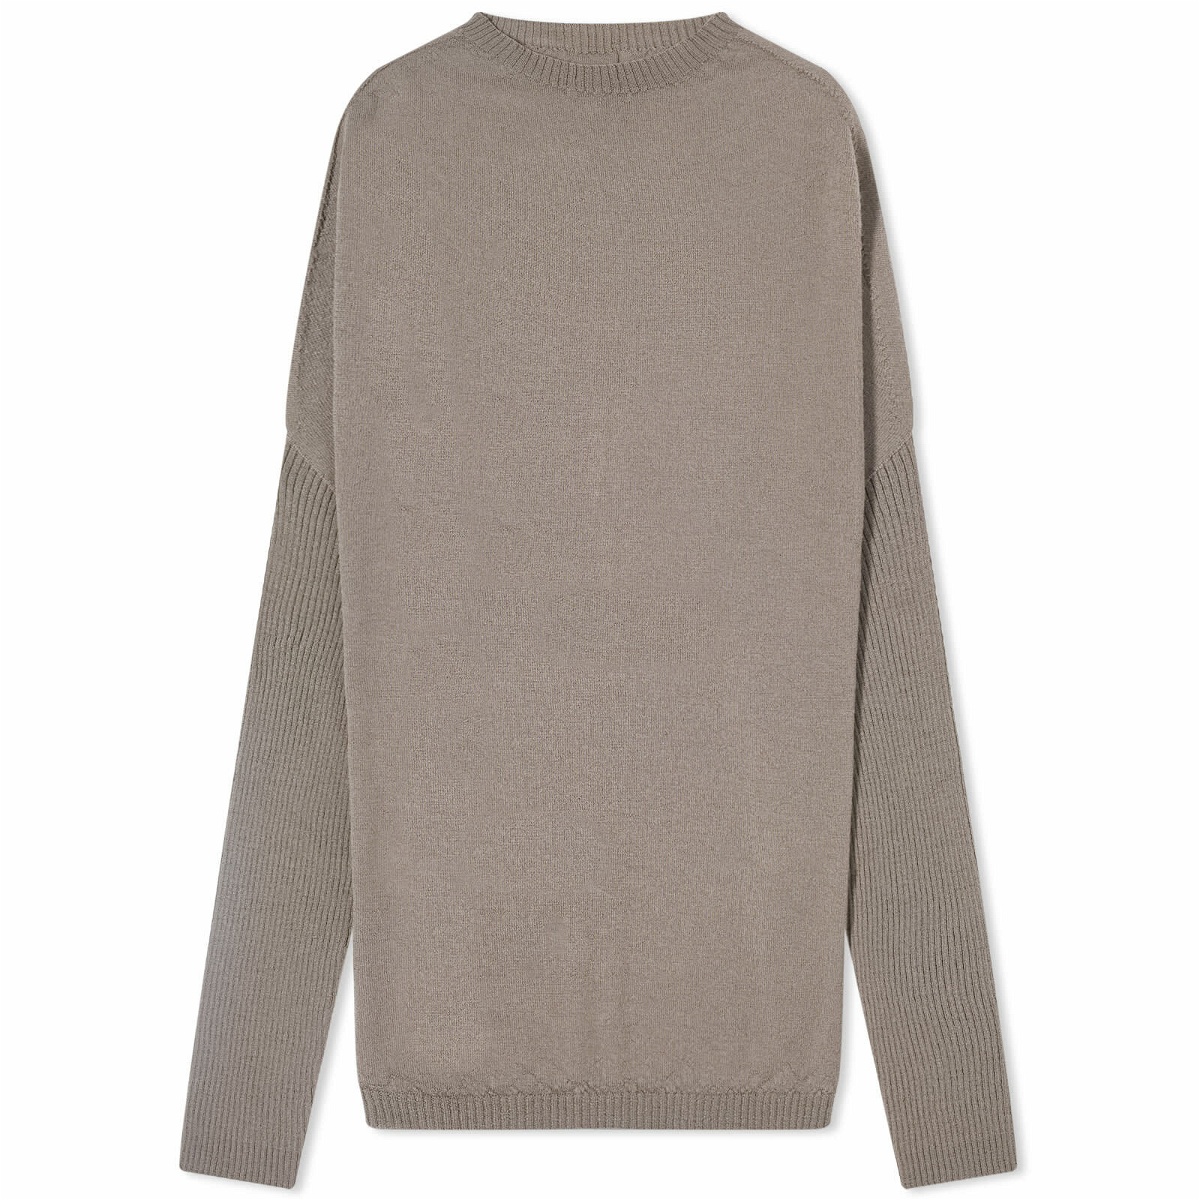 Photo: Rick Owens Women's Crater Knit Top in Dust